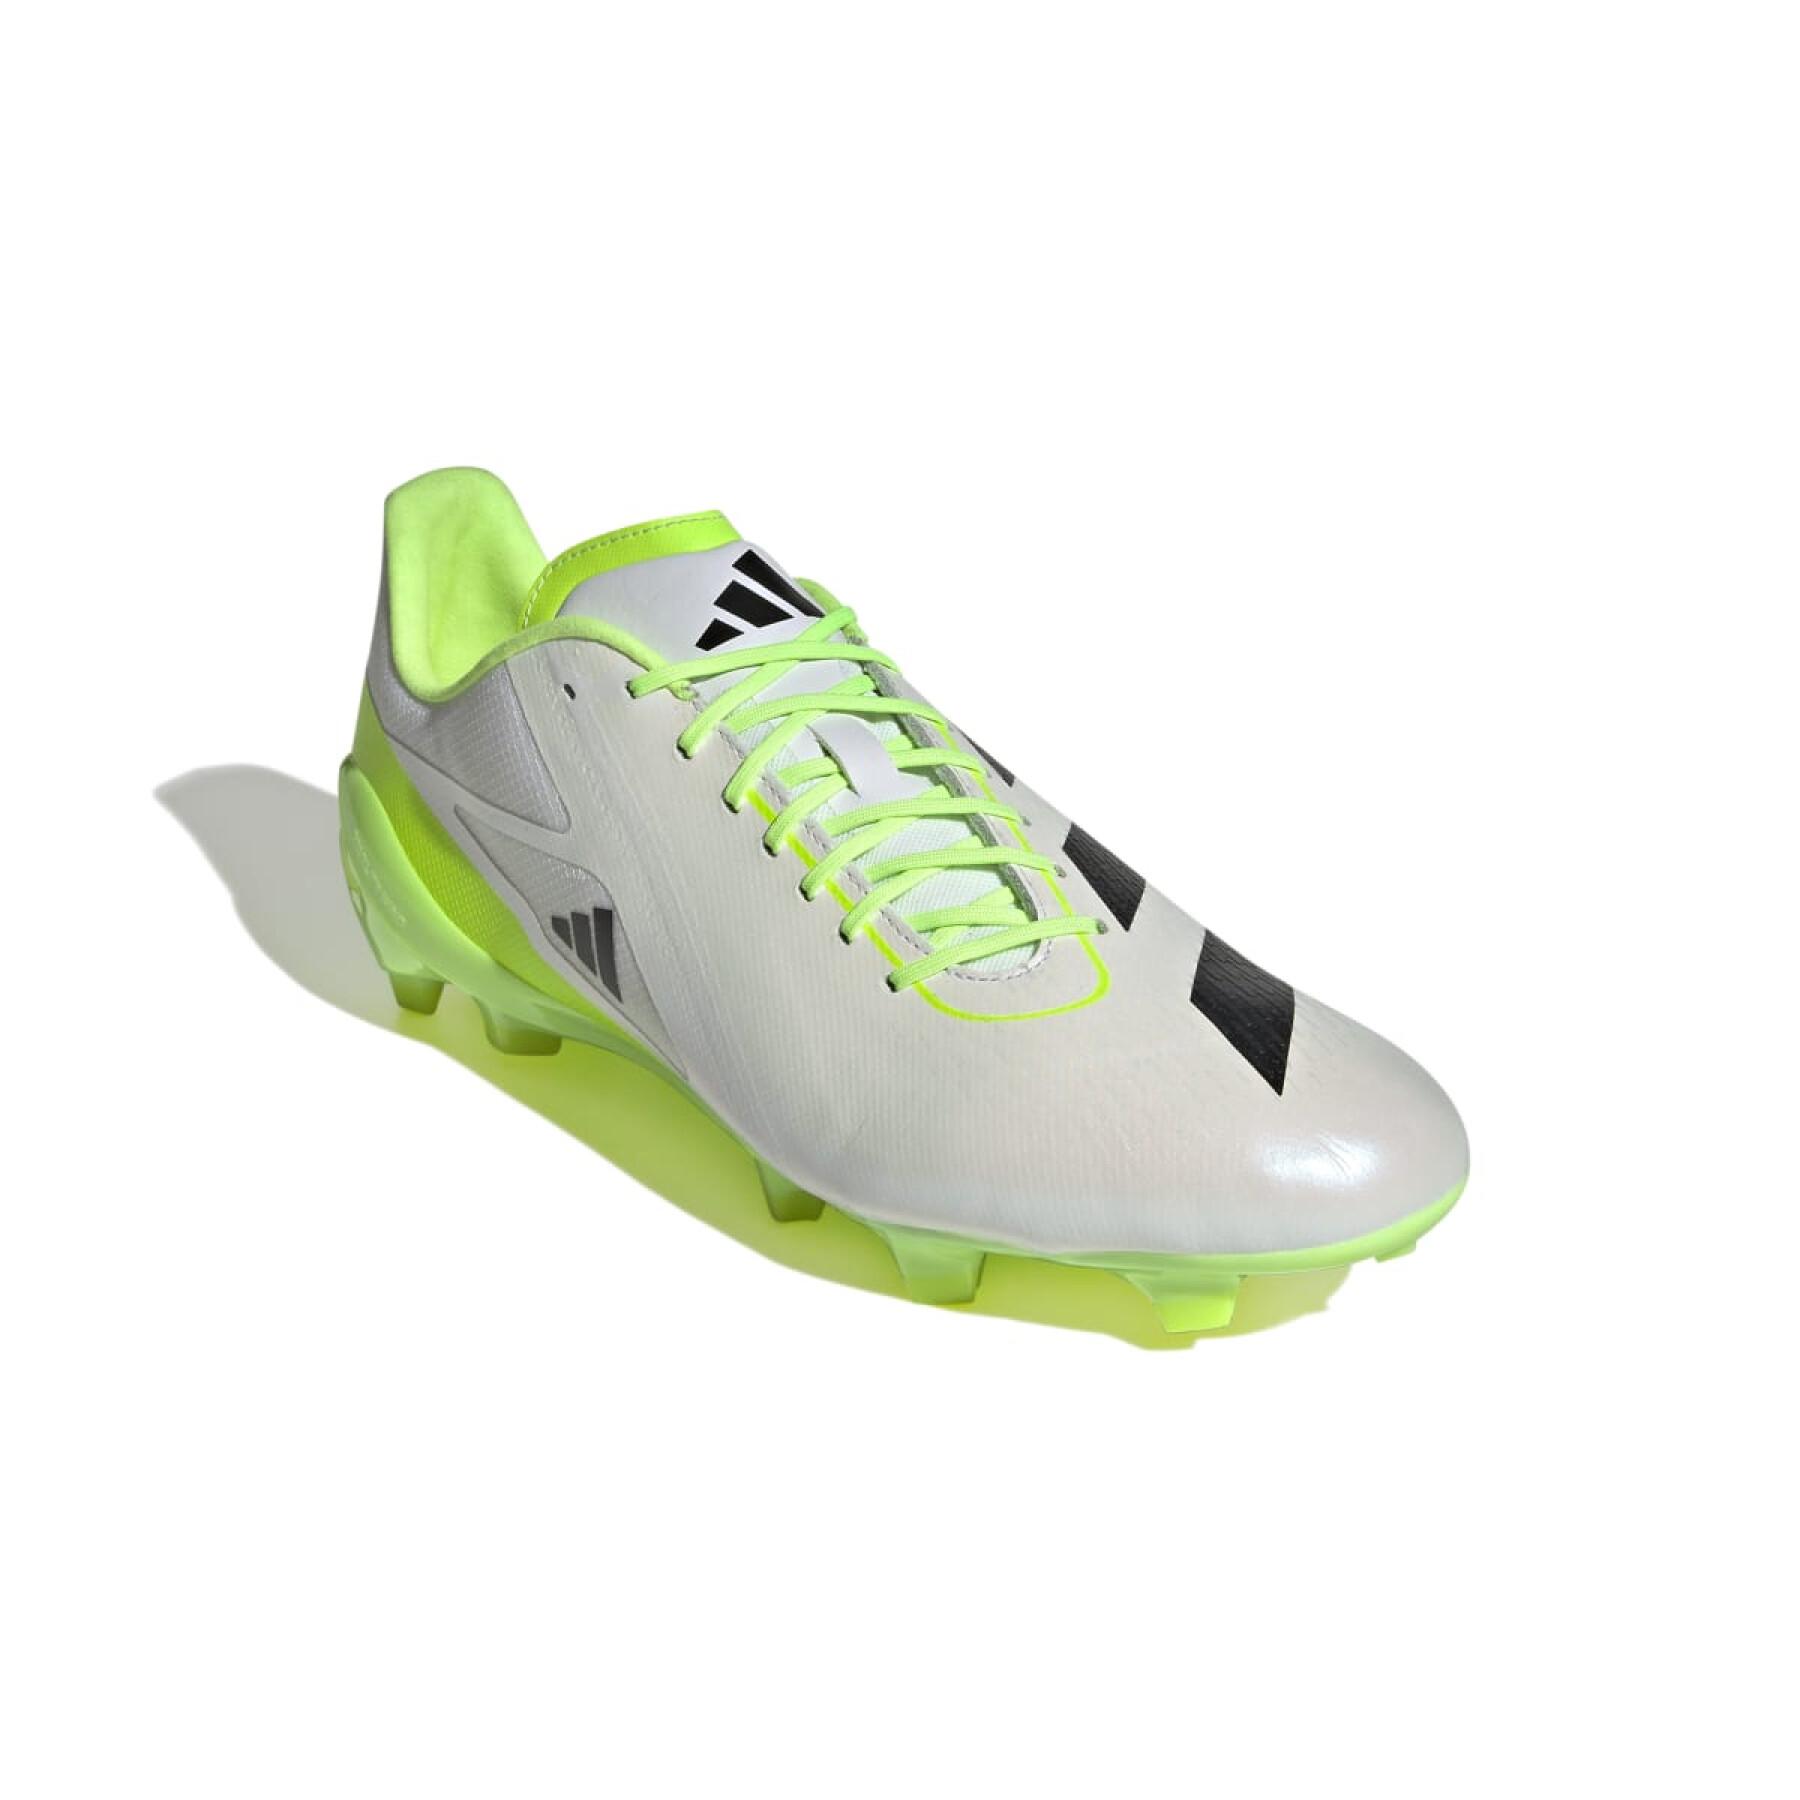 Chaussures de rugby adidas Adizero RS15 Pro FG